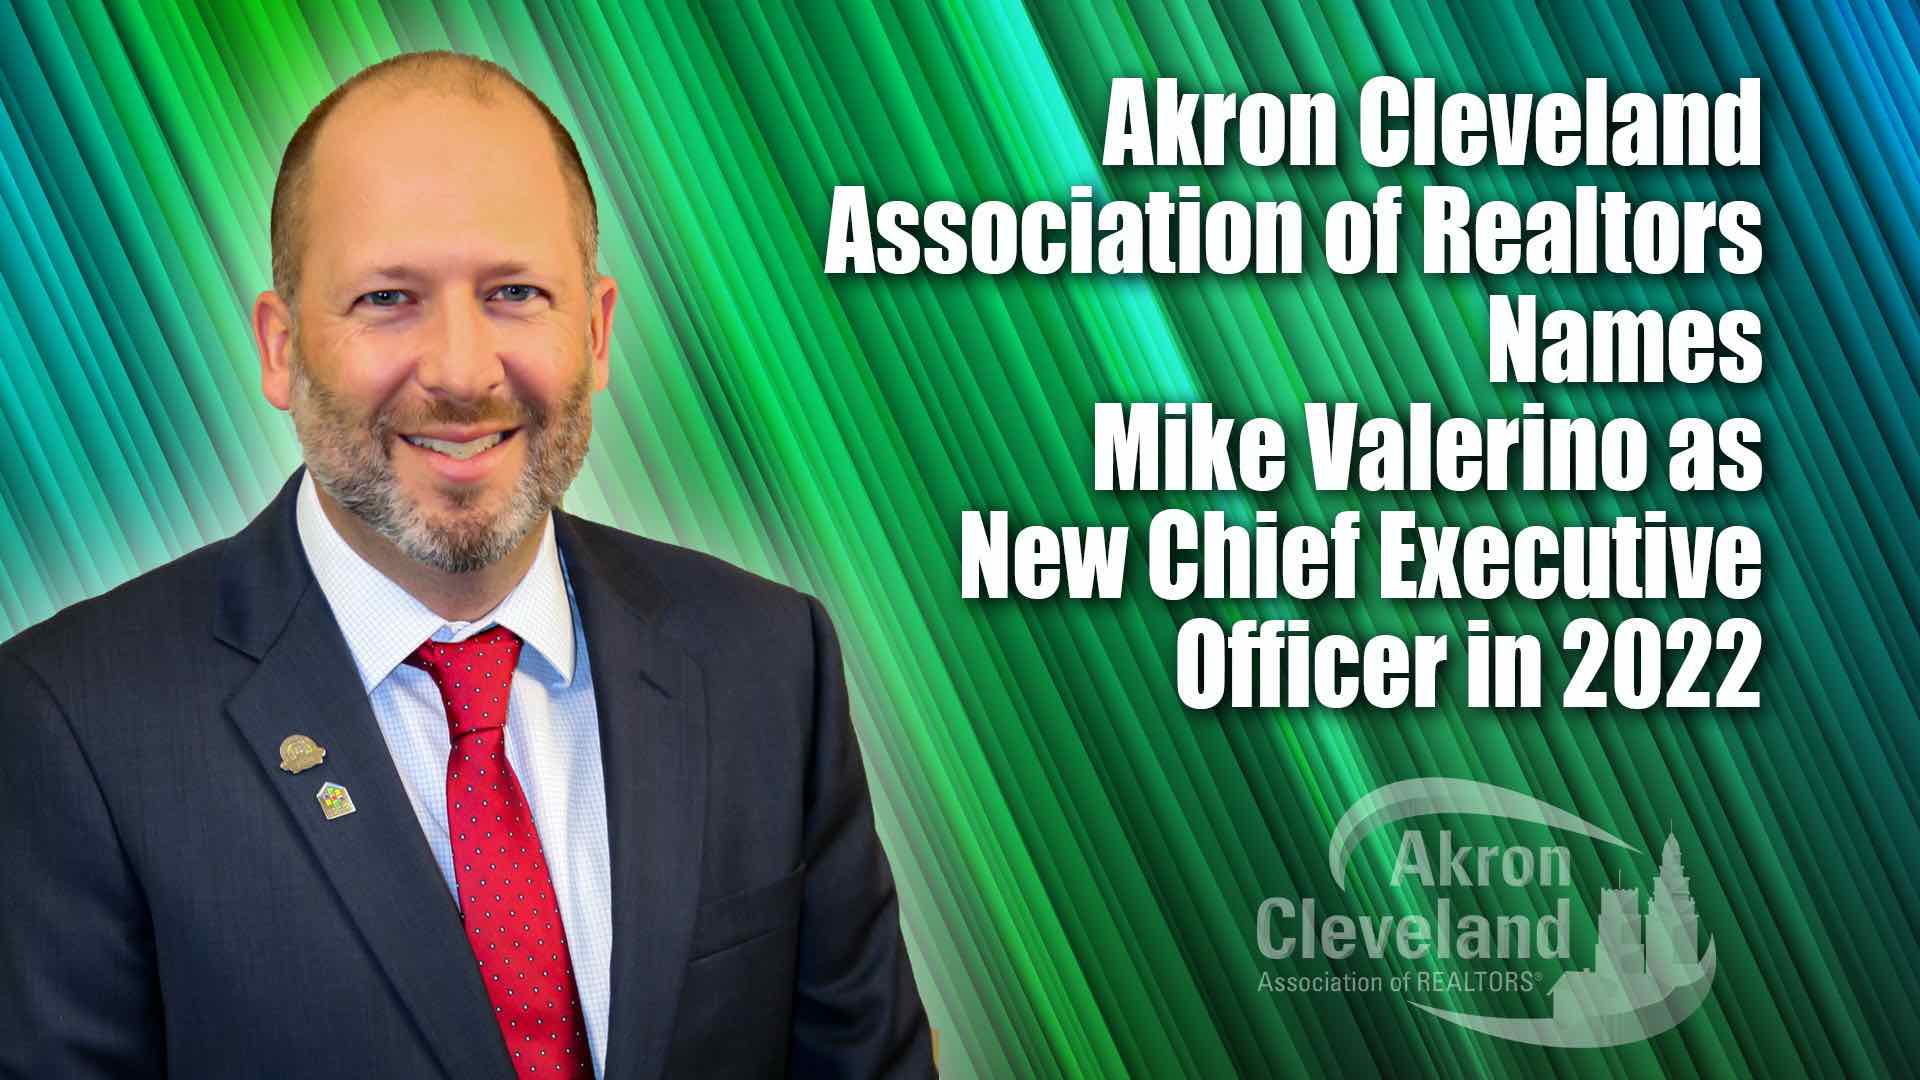 Featured image for “ACAR Names Mike Valerino as New Chief Executive Officer in 2022.”